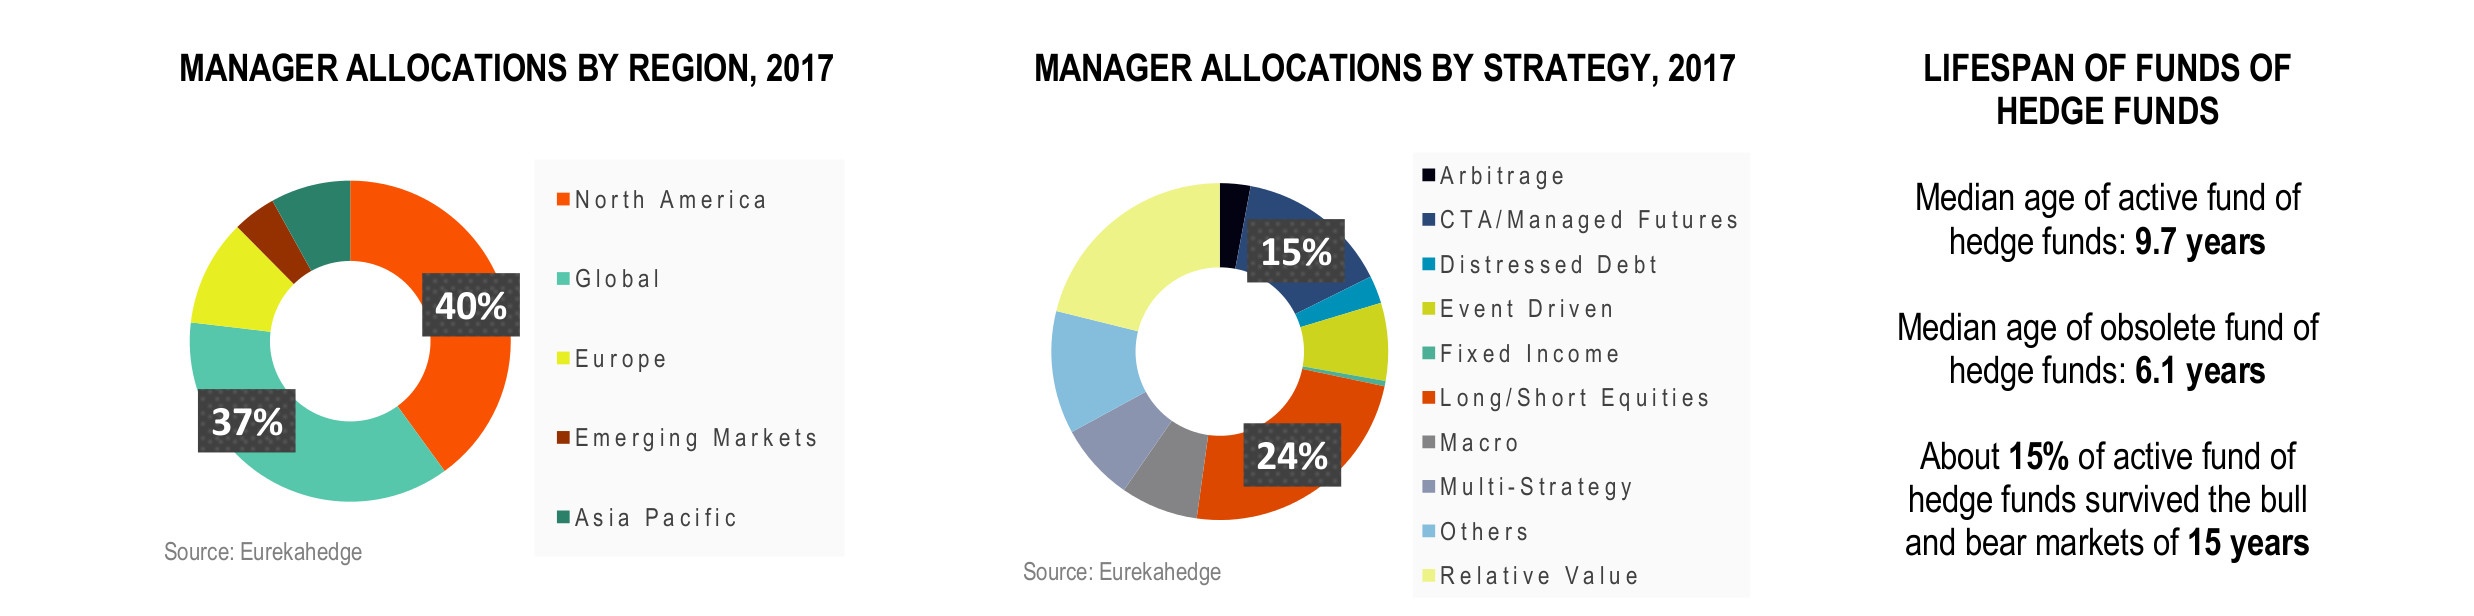 Global Funds of Hedge Fund Infographic May 2017 - Manager Allocation by region, strategy and lifespan of fund of hedge funds 